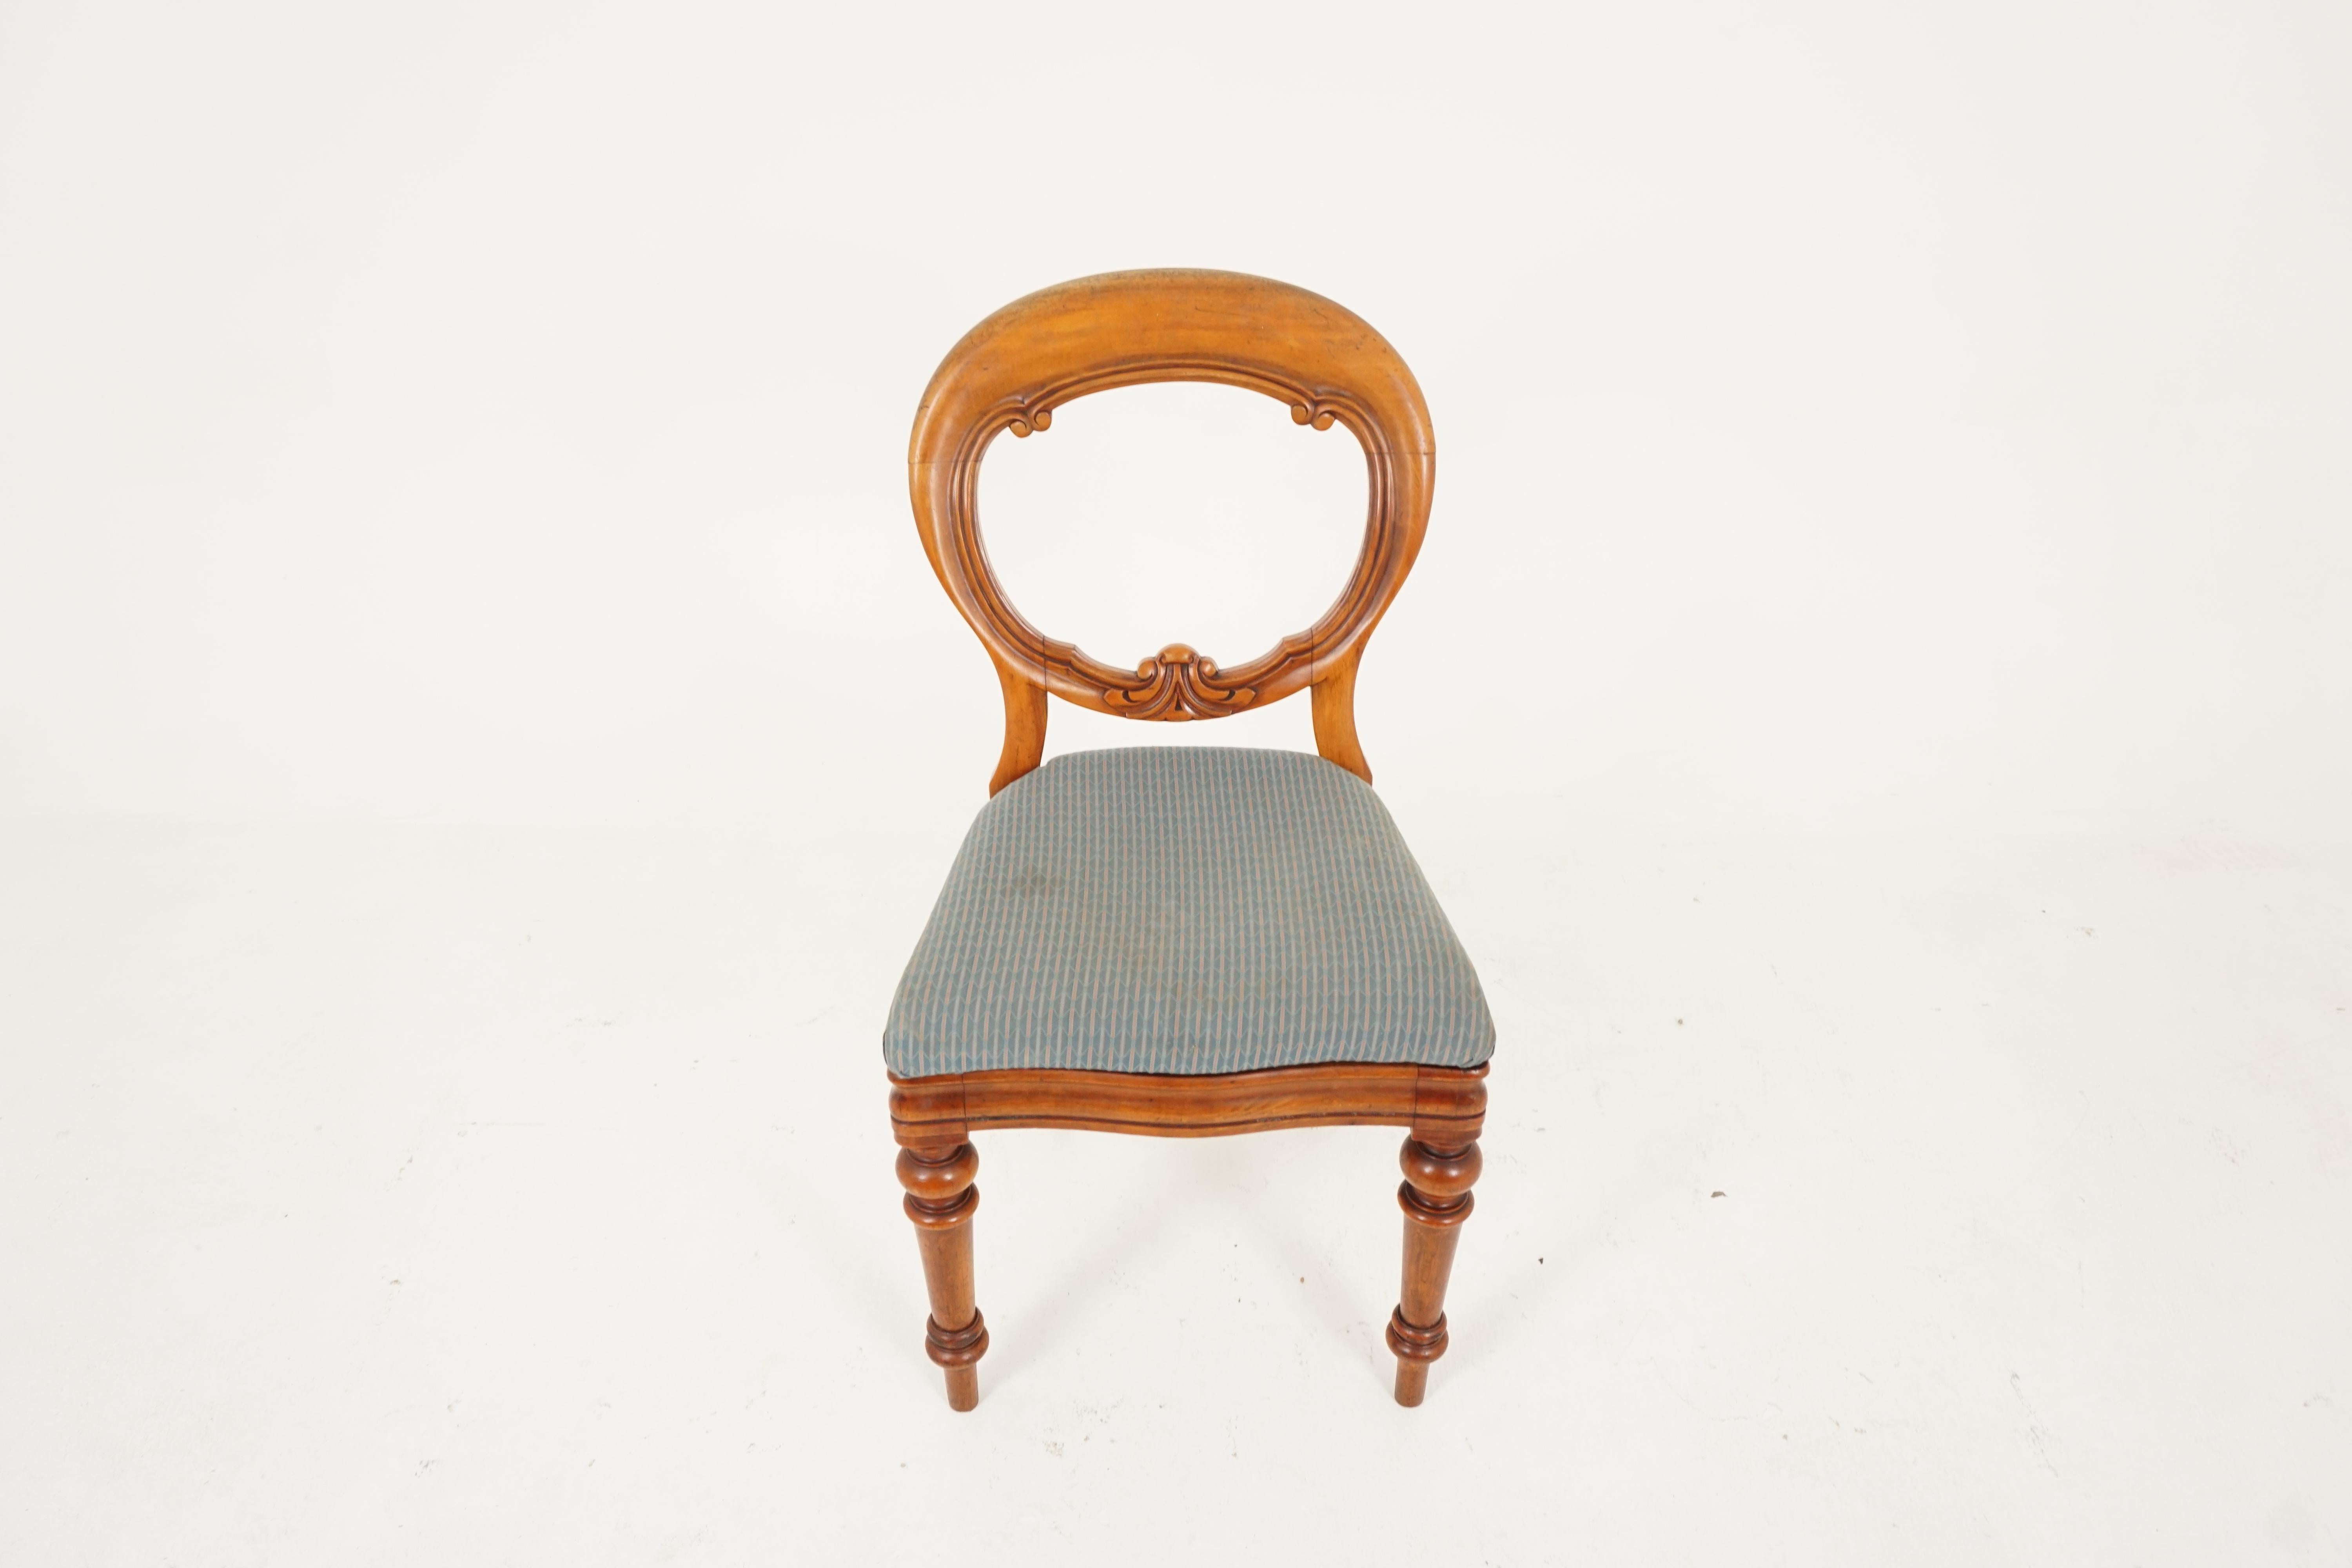 Antique balloon back dining chairs, birch, set of 4, Scotland 1880, B2475.

Scotland, 1880
Solid birch
Original finish
Chairs have a shaped open back
Carved back rail
Lift out upholstered seat
Shaped curved rail to the front
Standing on